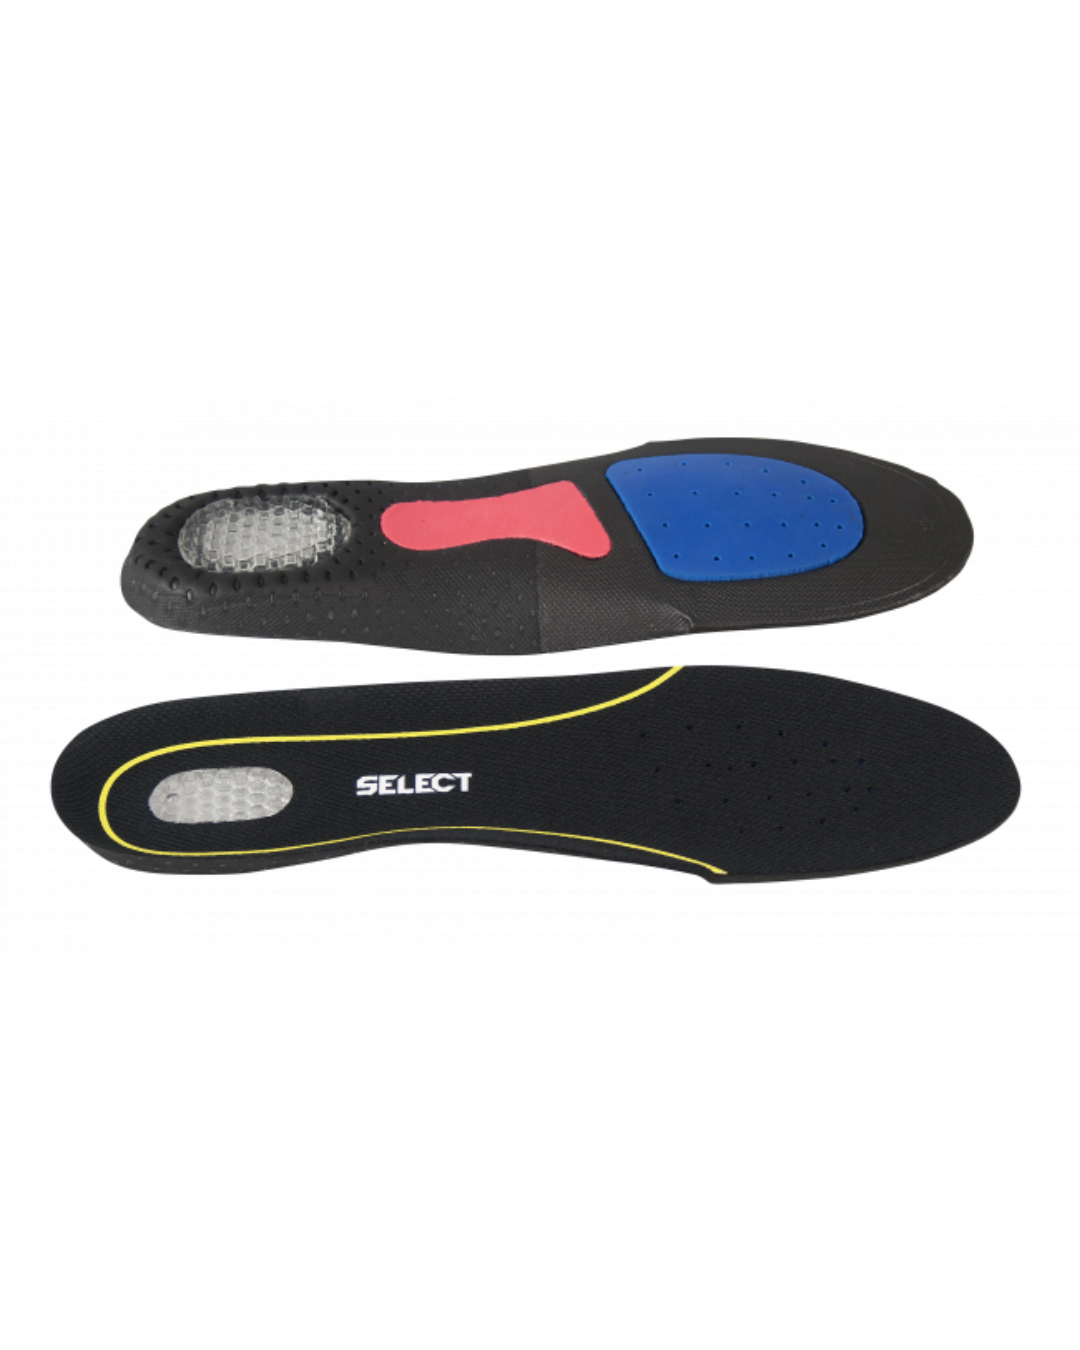 Select Pro Care Replace Insole 1 pair